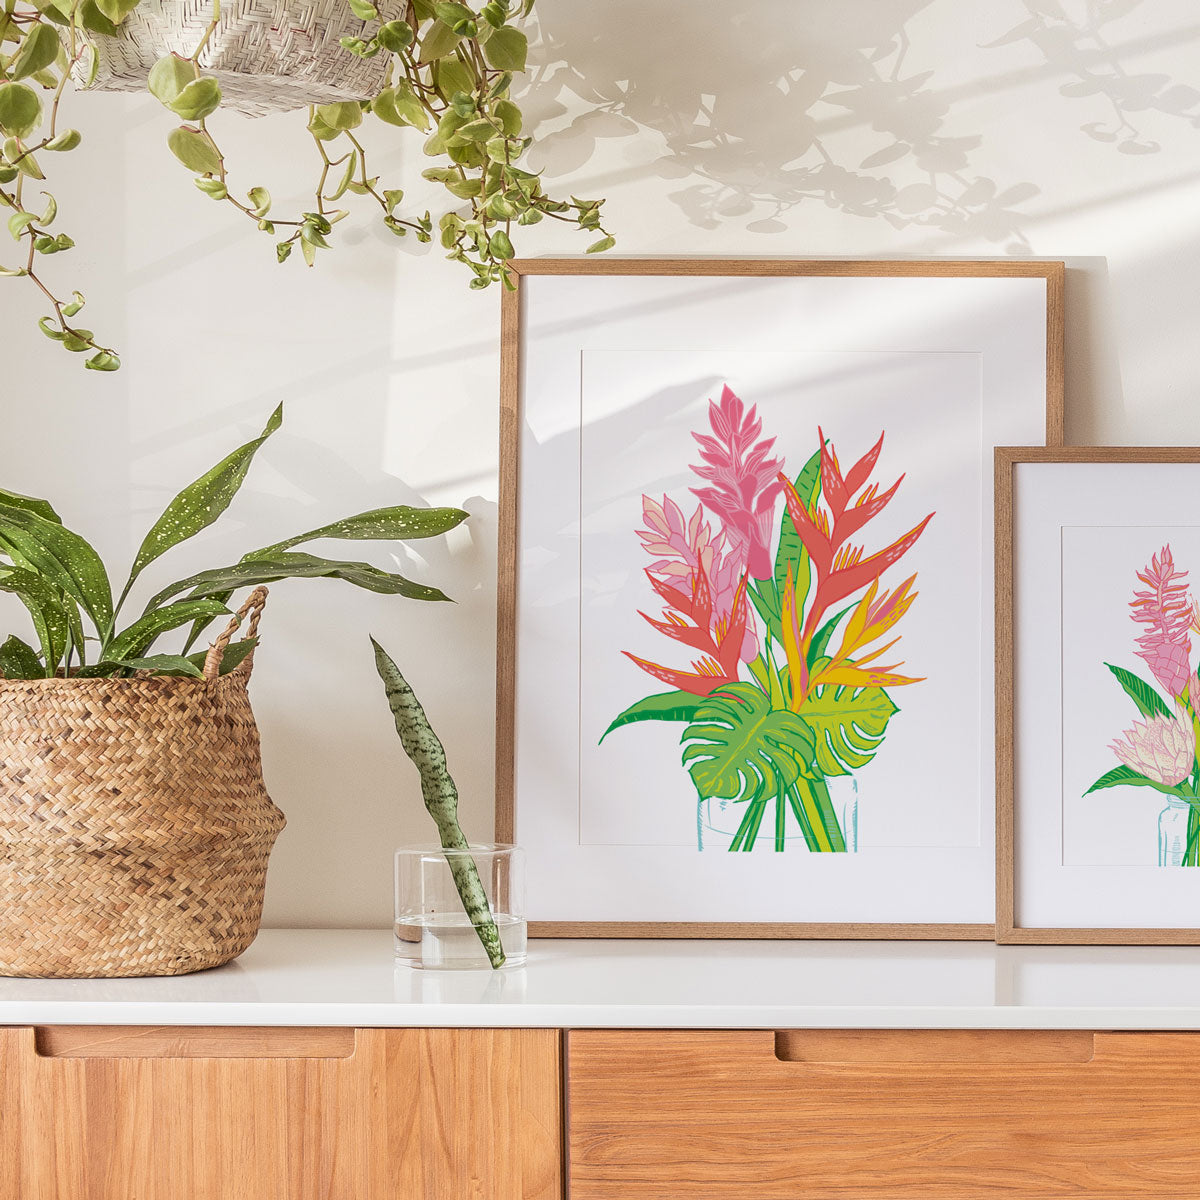 Heliconia Tropical Bouquet - Art Print (11x14)